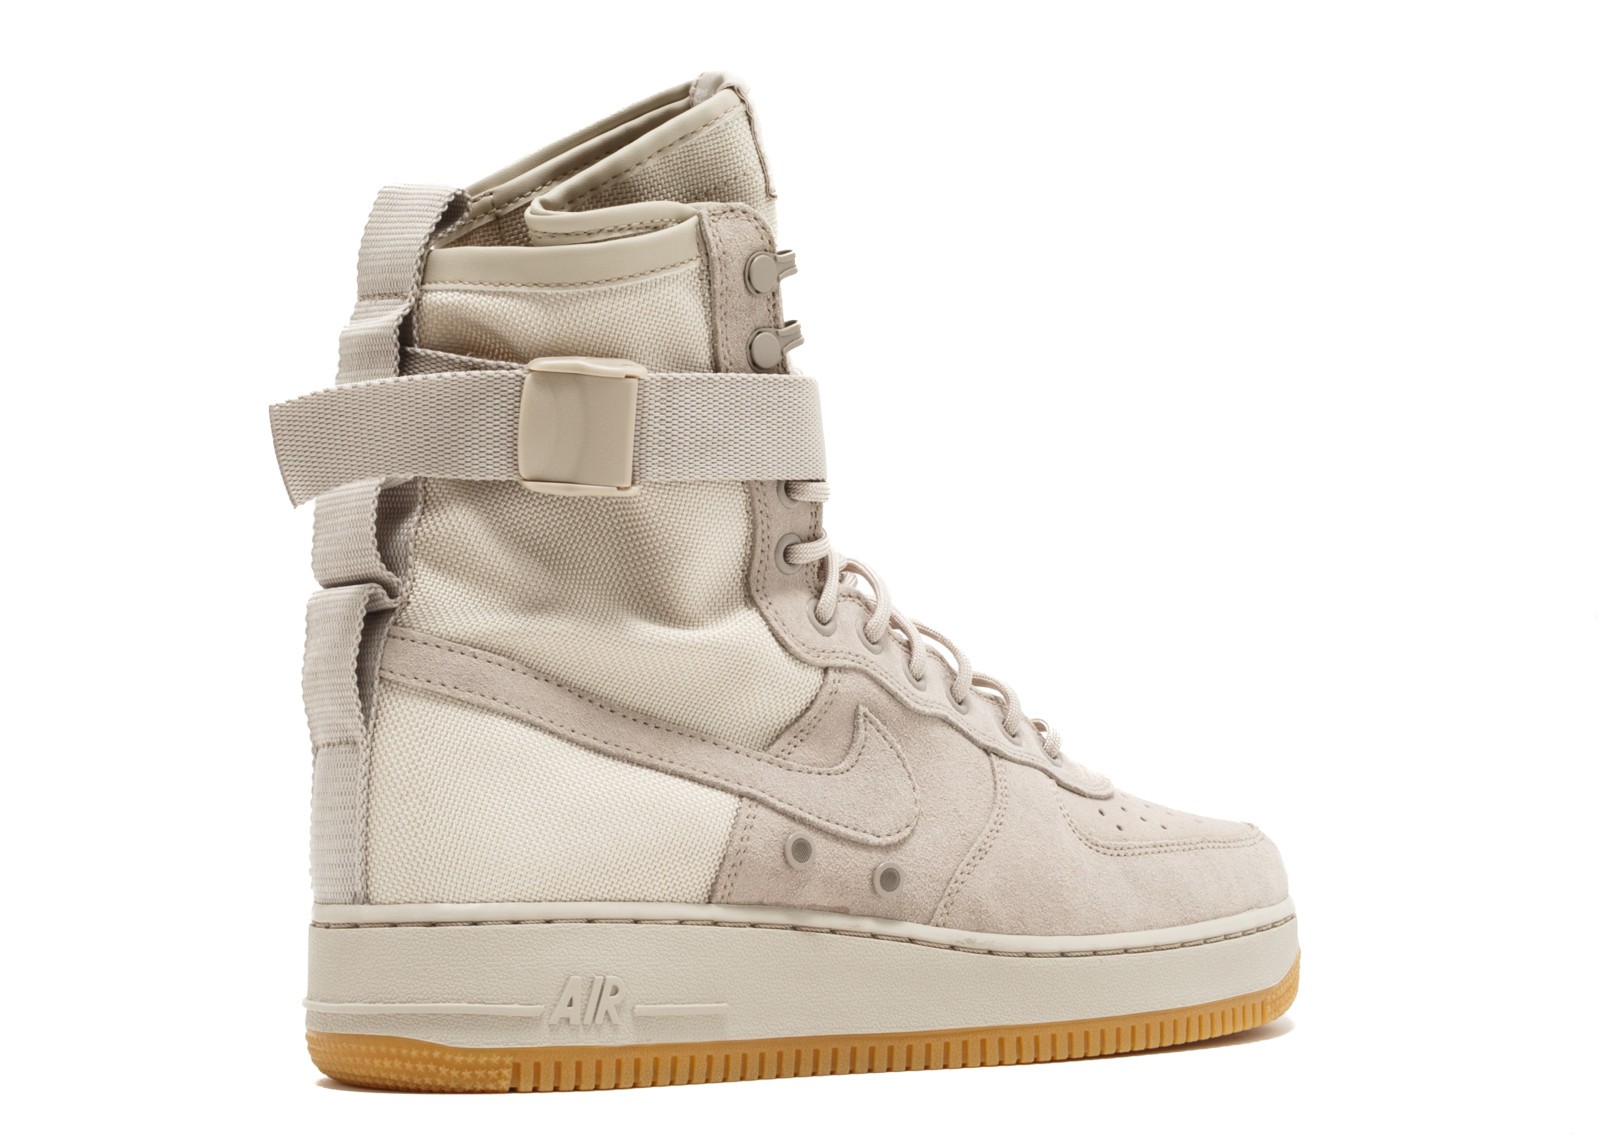 nike special edition boys and girls.club kids - - Nike Air Force 1 Sf Af1 Special Field String - 200